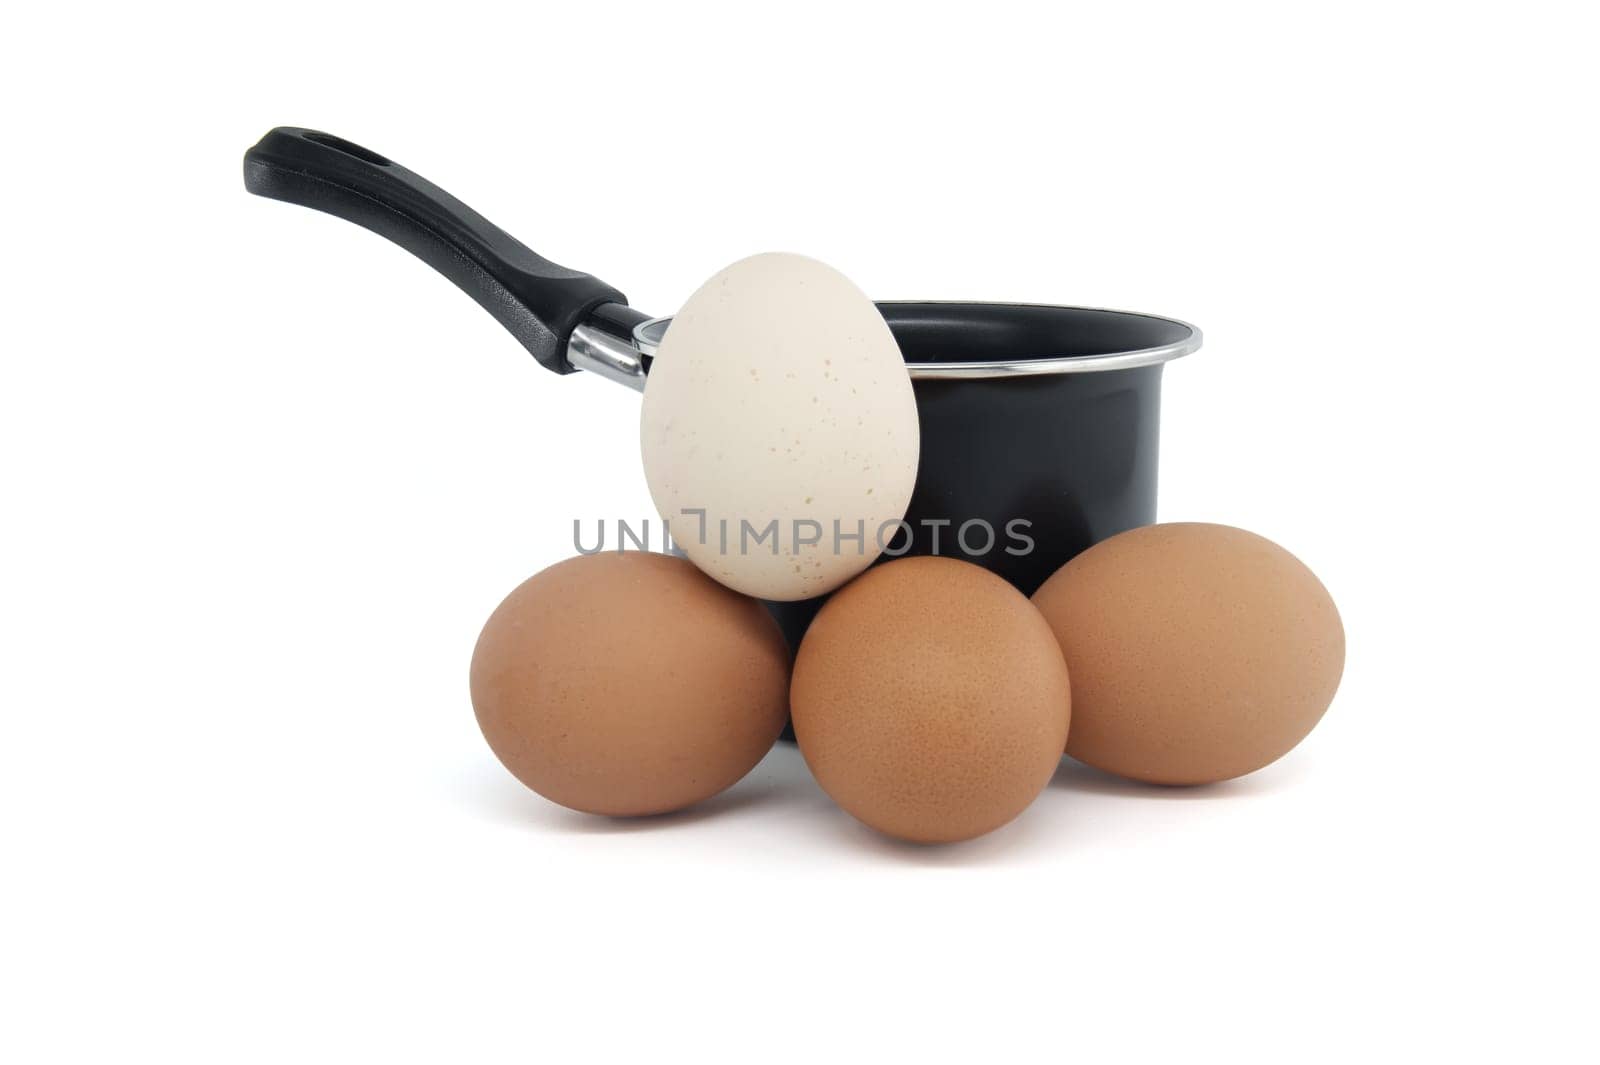 Black cooking pot surrounding collection of eggs with varying colors, isolated on white background